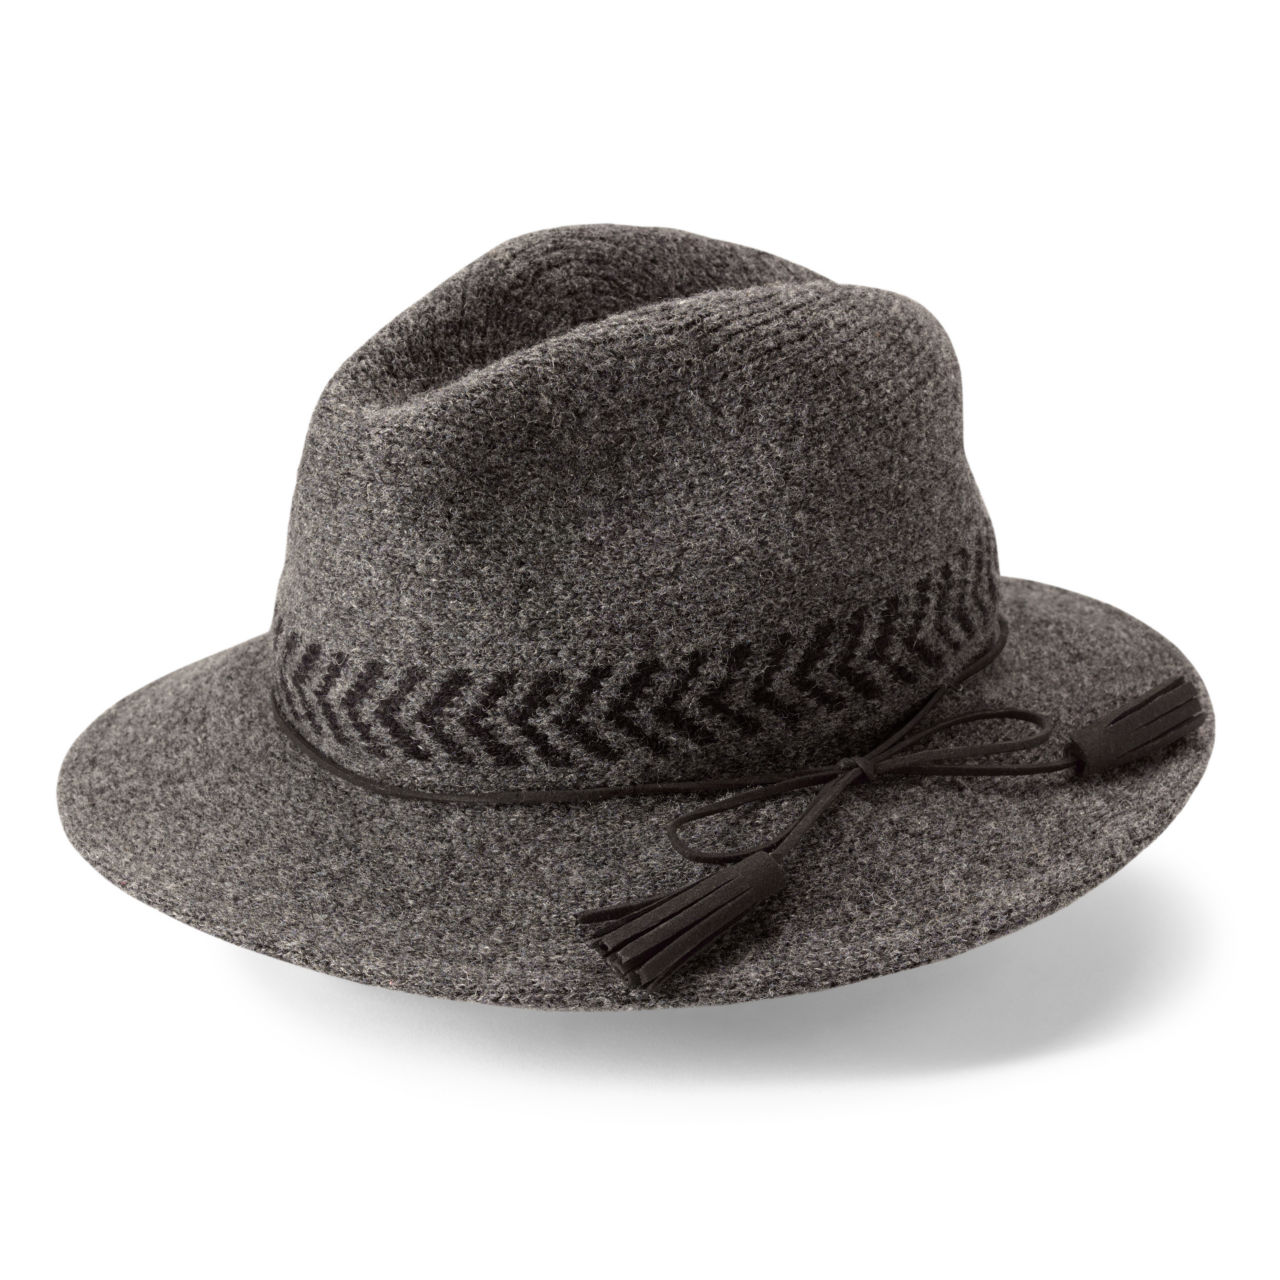 Women’s Wool-Blend Knit Panama Hat - CHARCOAL HEATHER image number 0